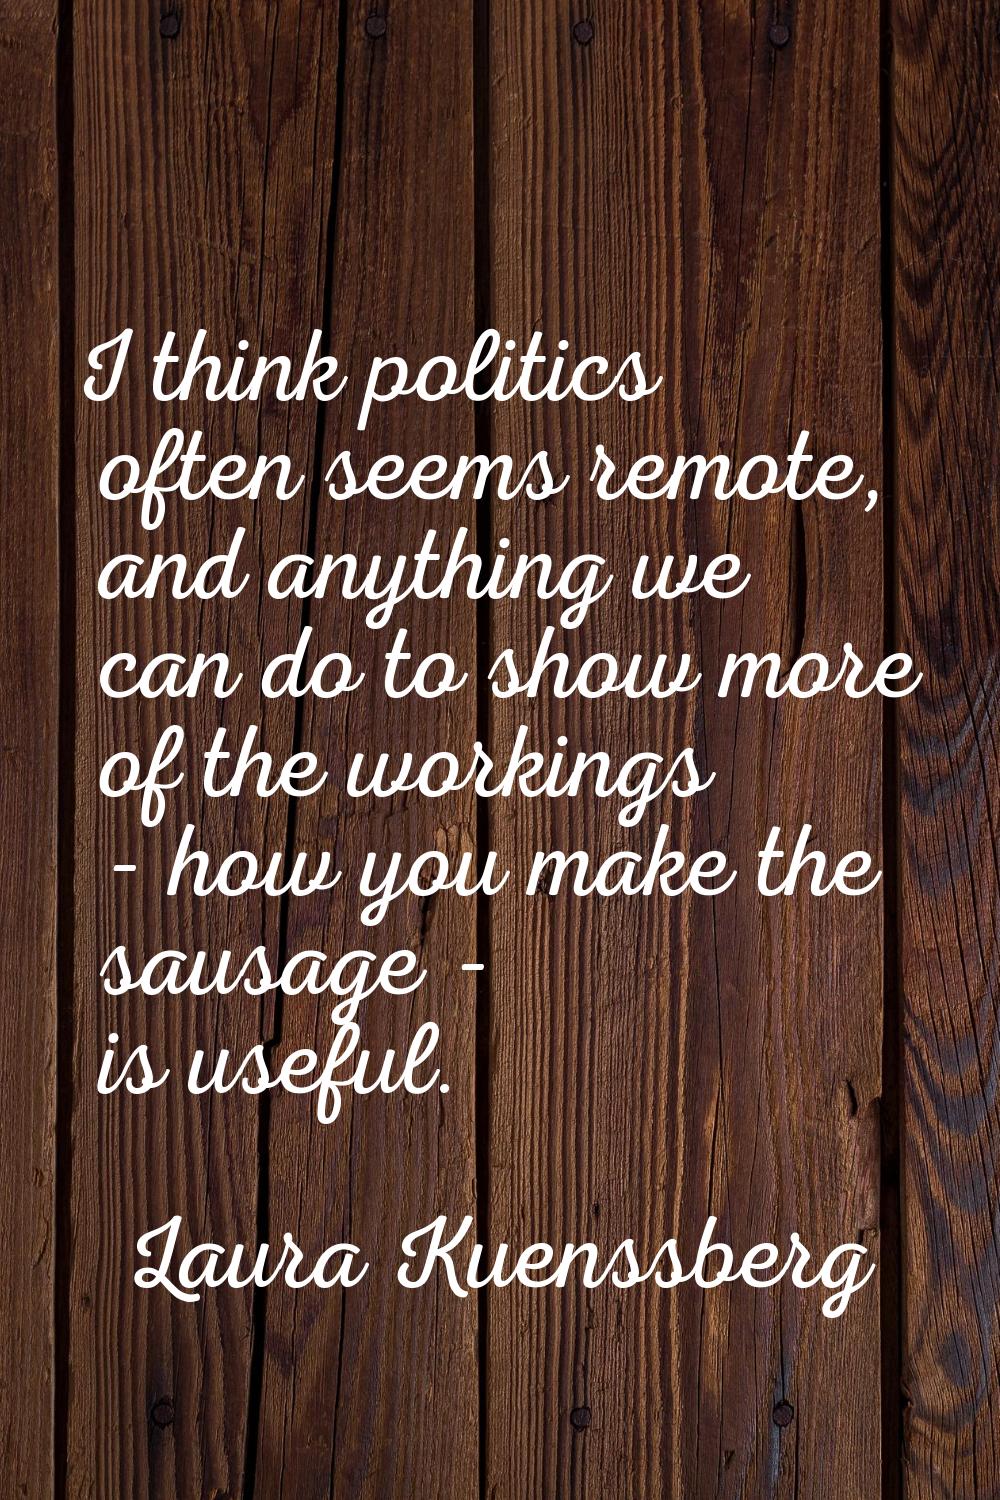 I think politics often seems remote, and anything we can do to show more of the workings - how you 